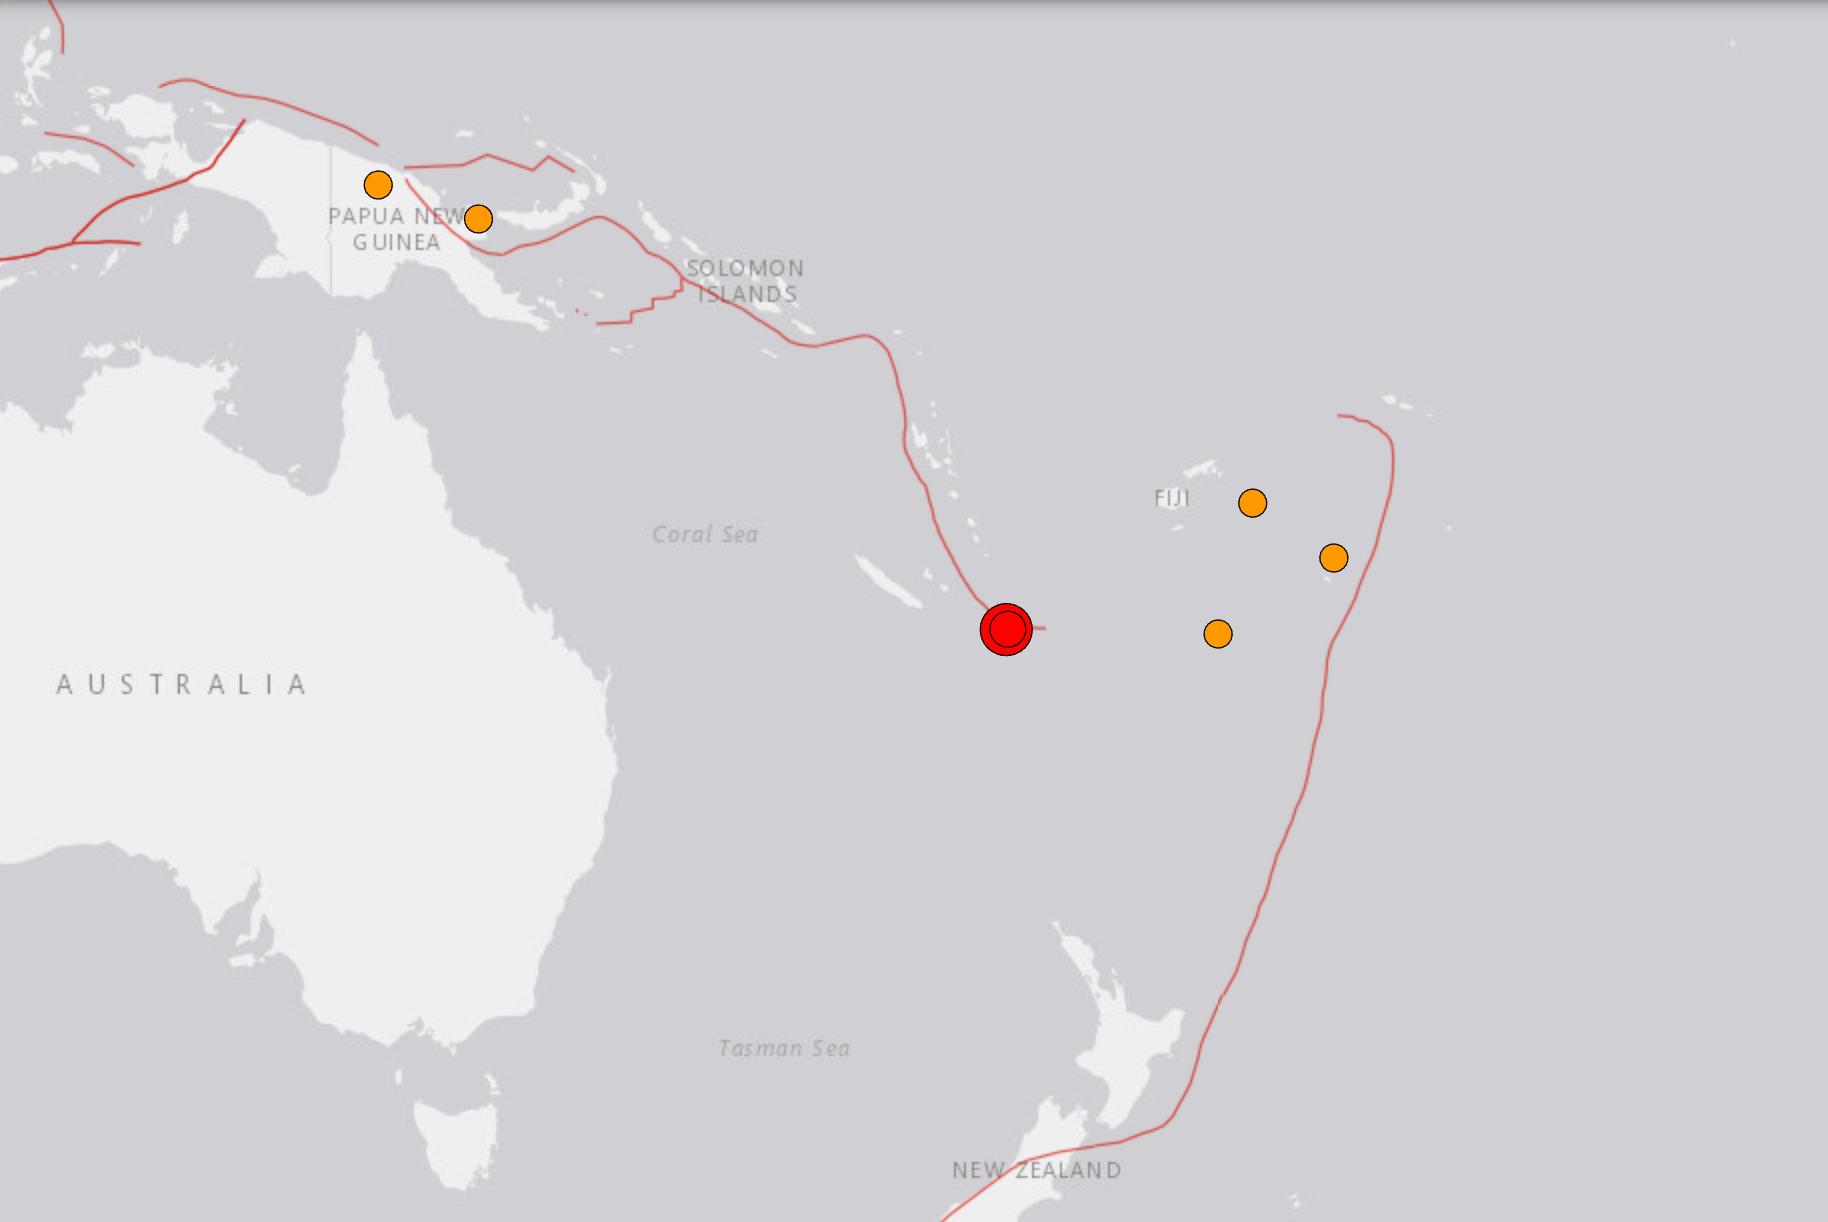 Tsunami threat passes in South Pacific after magnitude 7.7 quake off New Caledonia